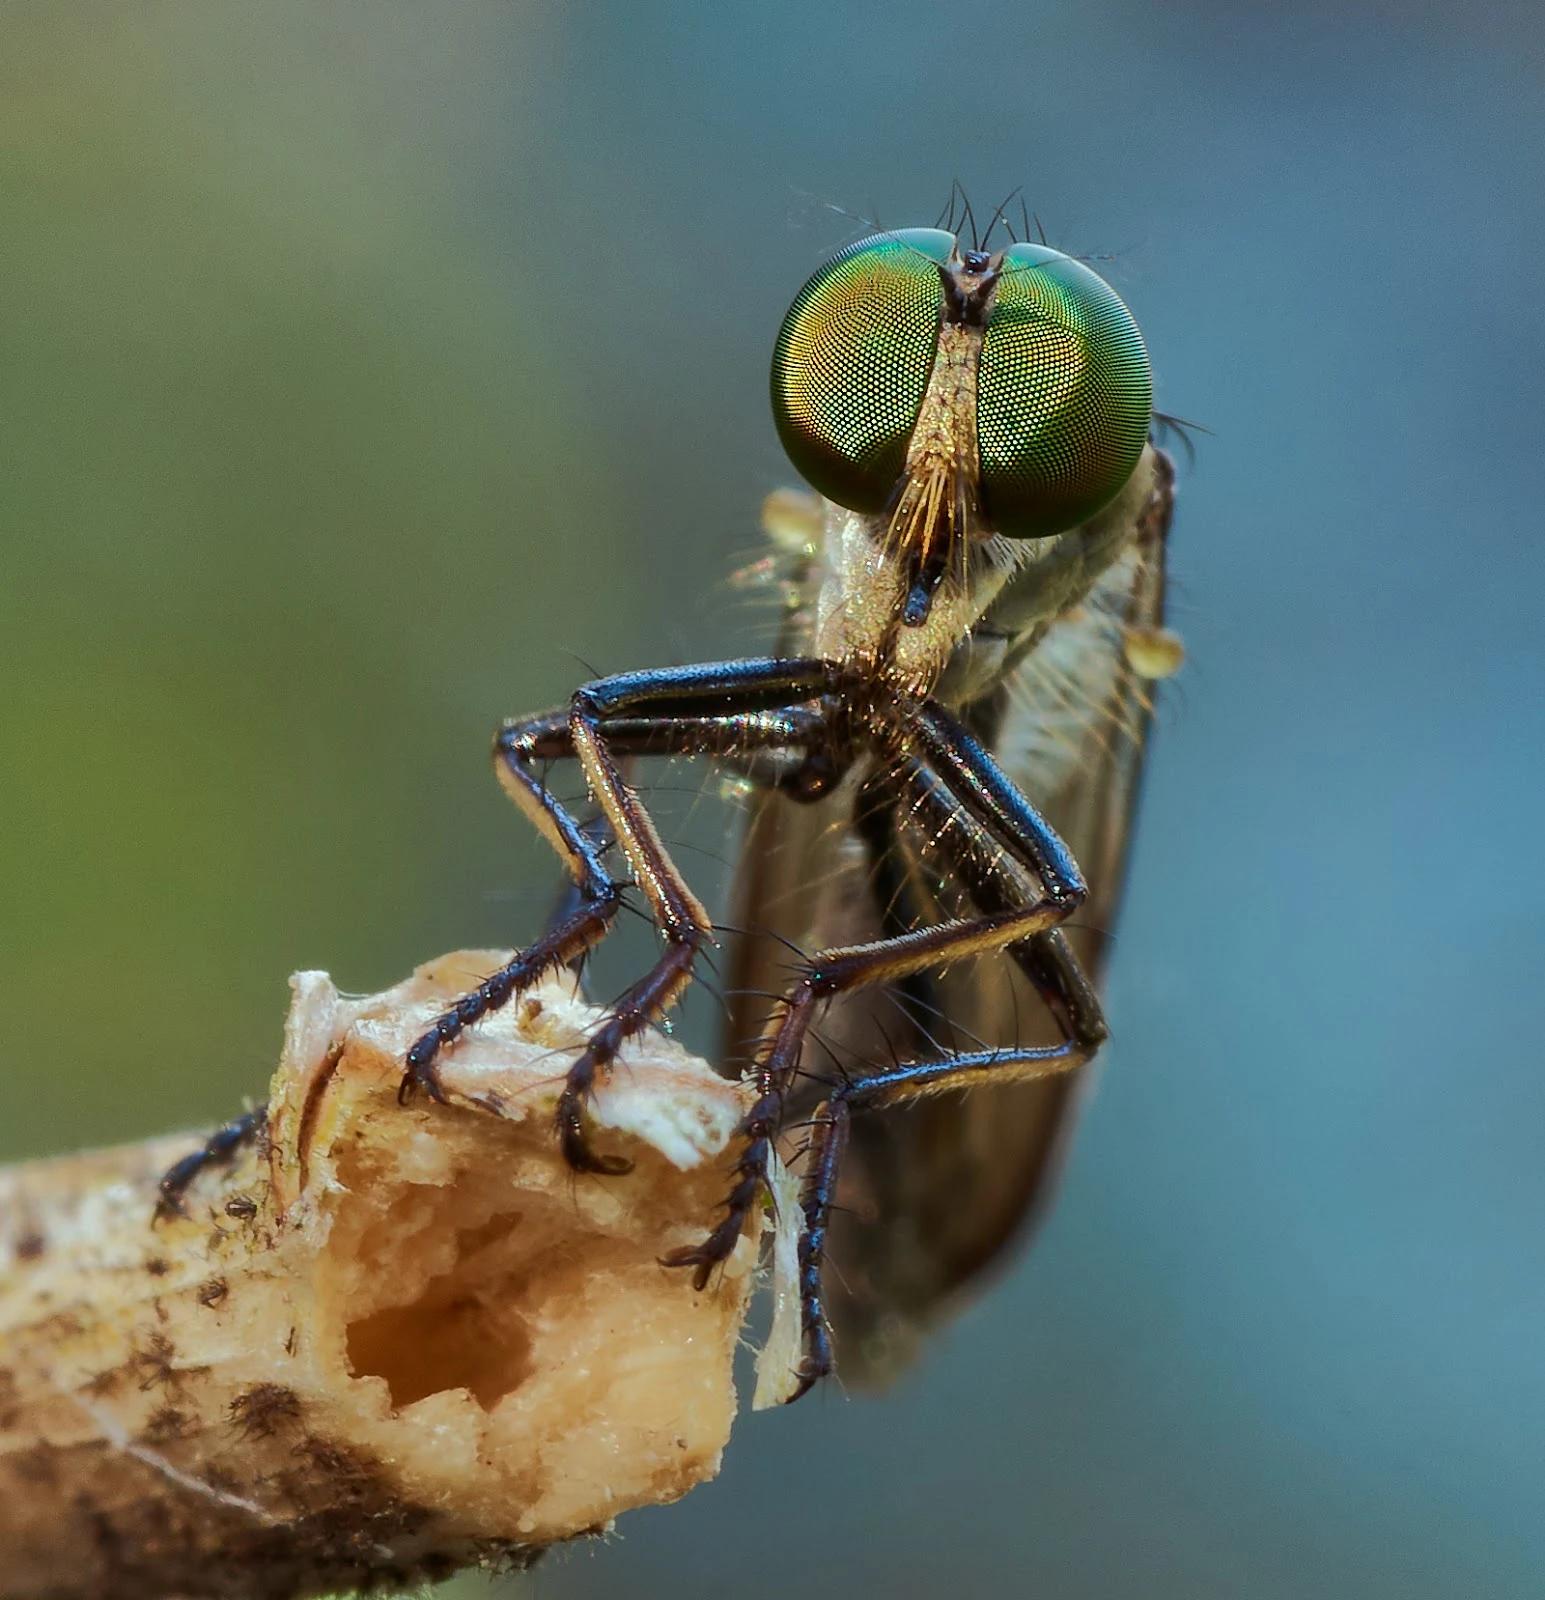 The soft, gentle background bring out the vibrancy and boldness of the Robber Flies eyes and legs.